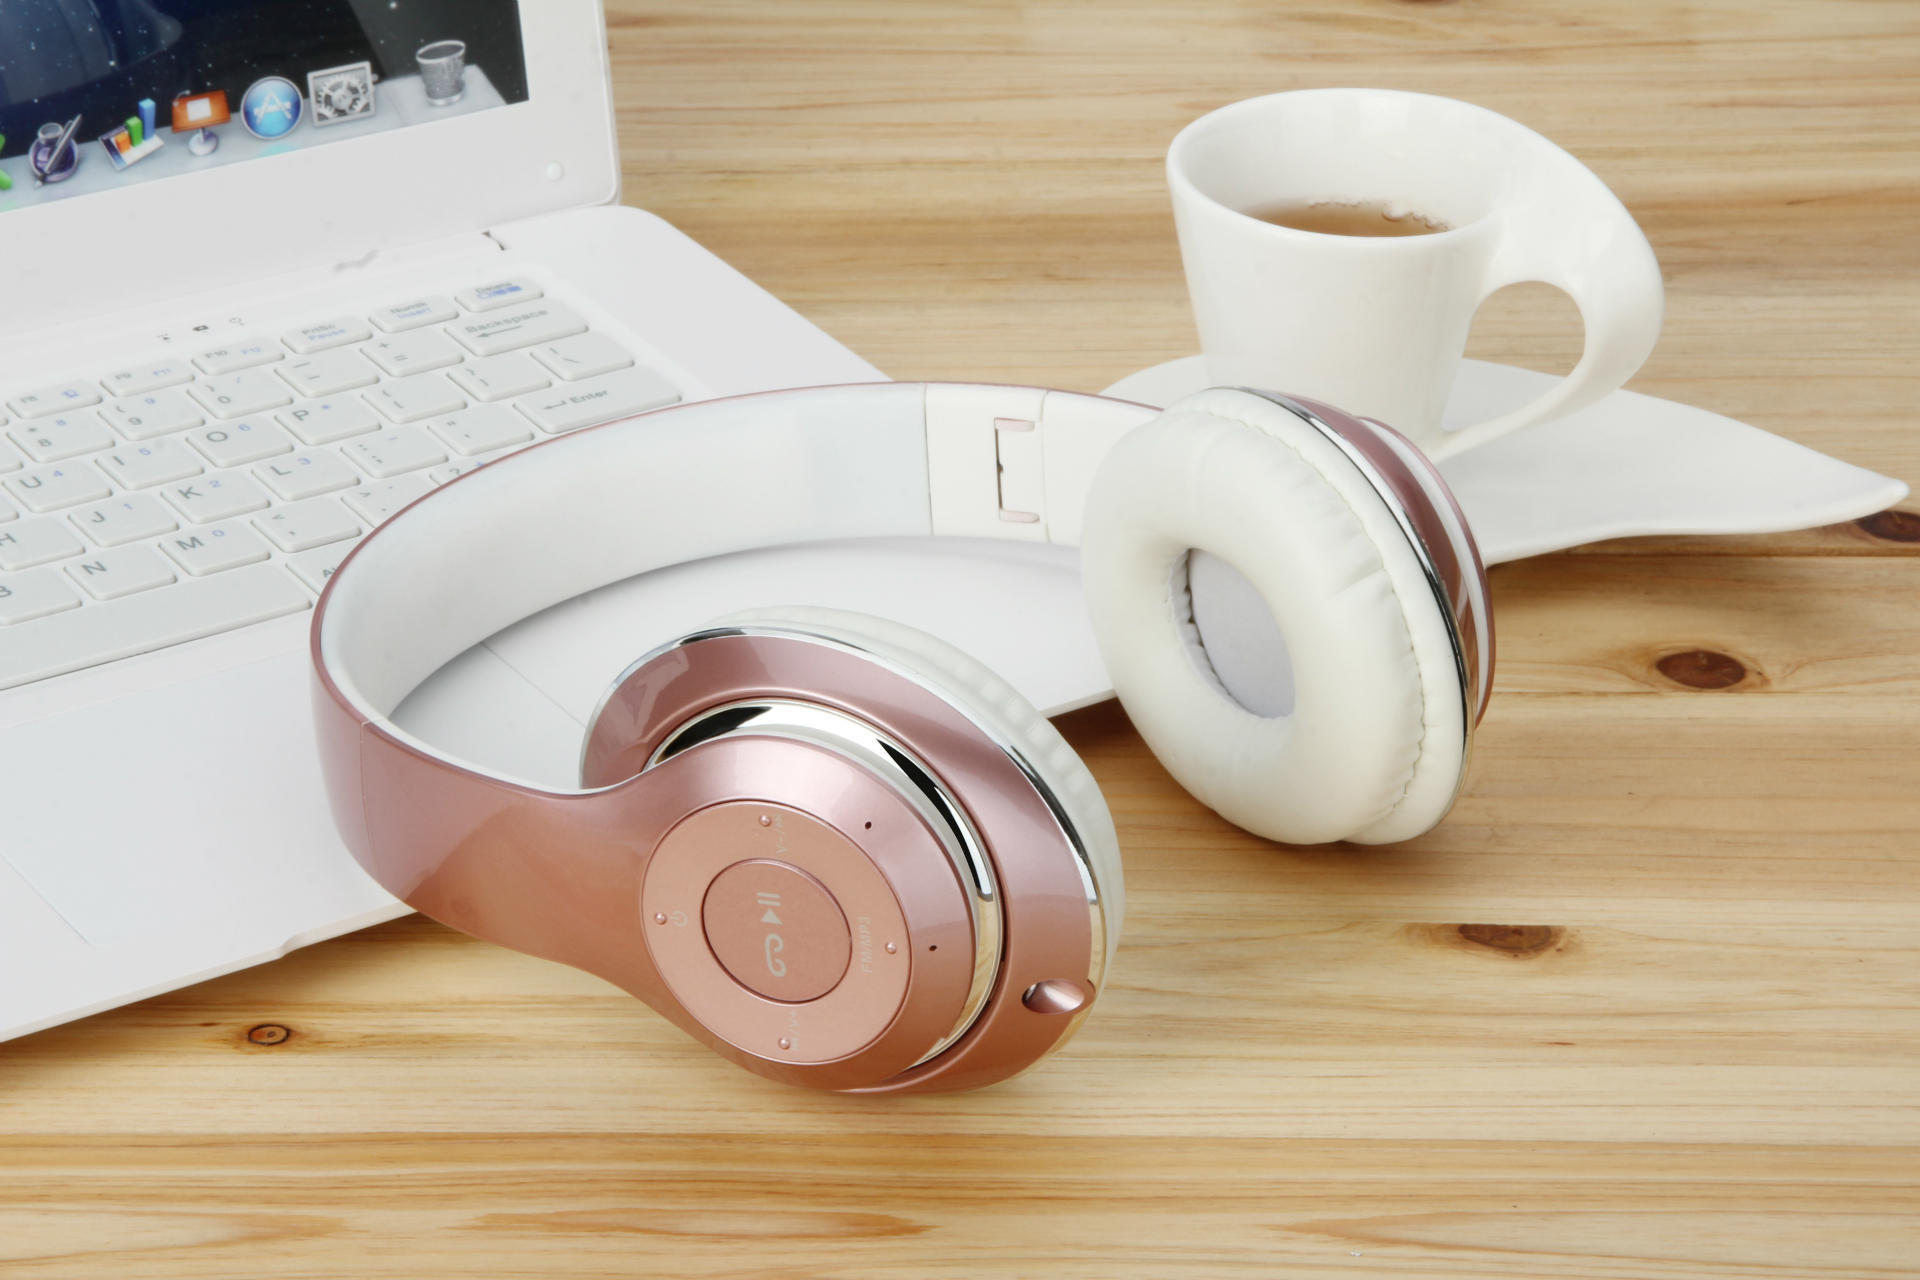 Premium Sound HD Over the Ear Wireless Bluetooth Stereo HEADPHONE HK399 (Rose Gold)